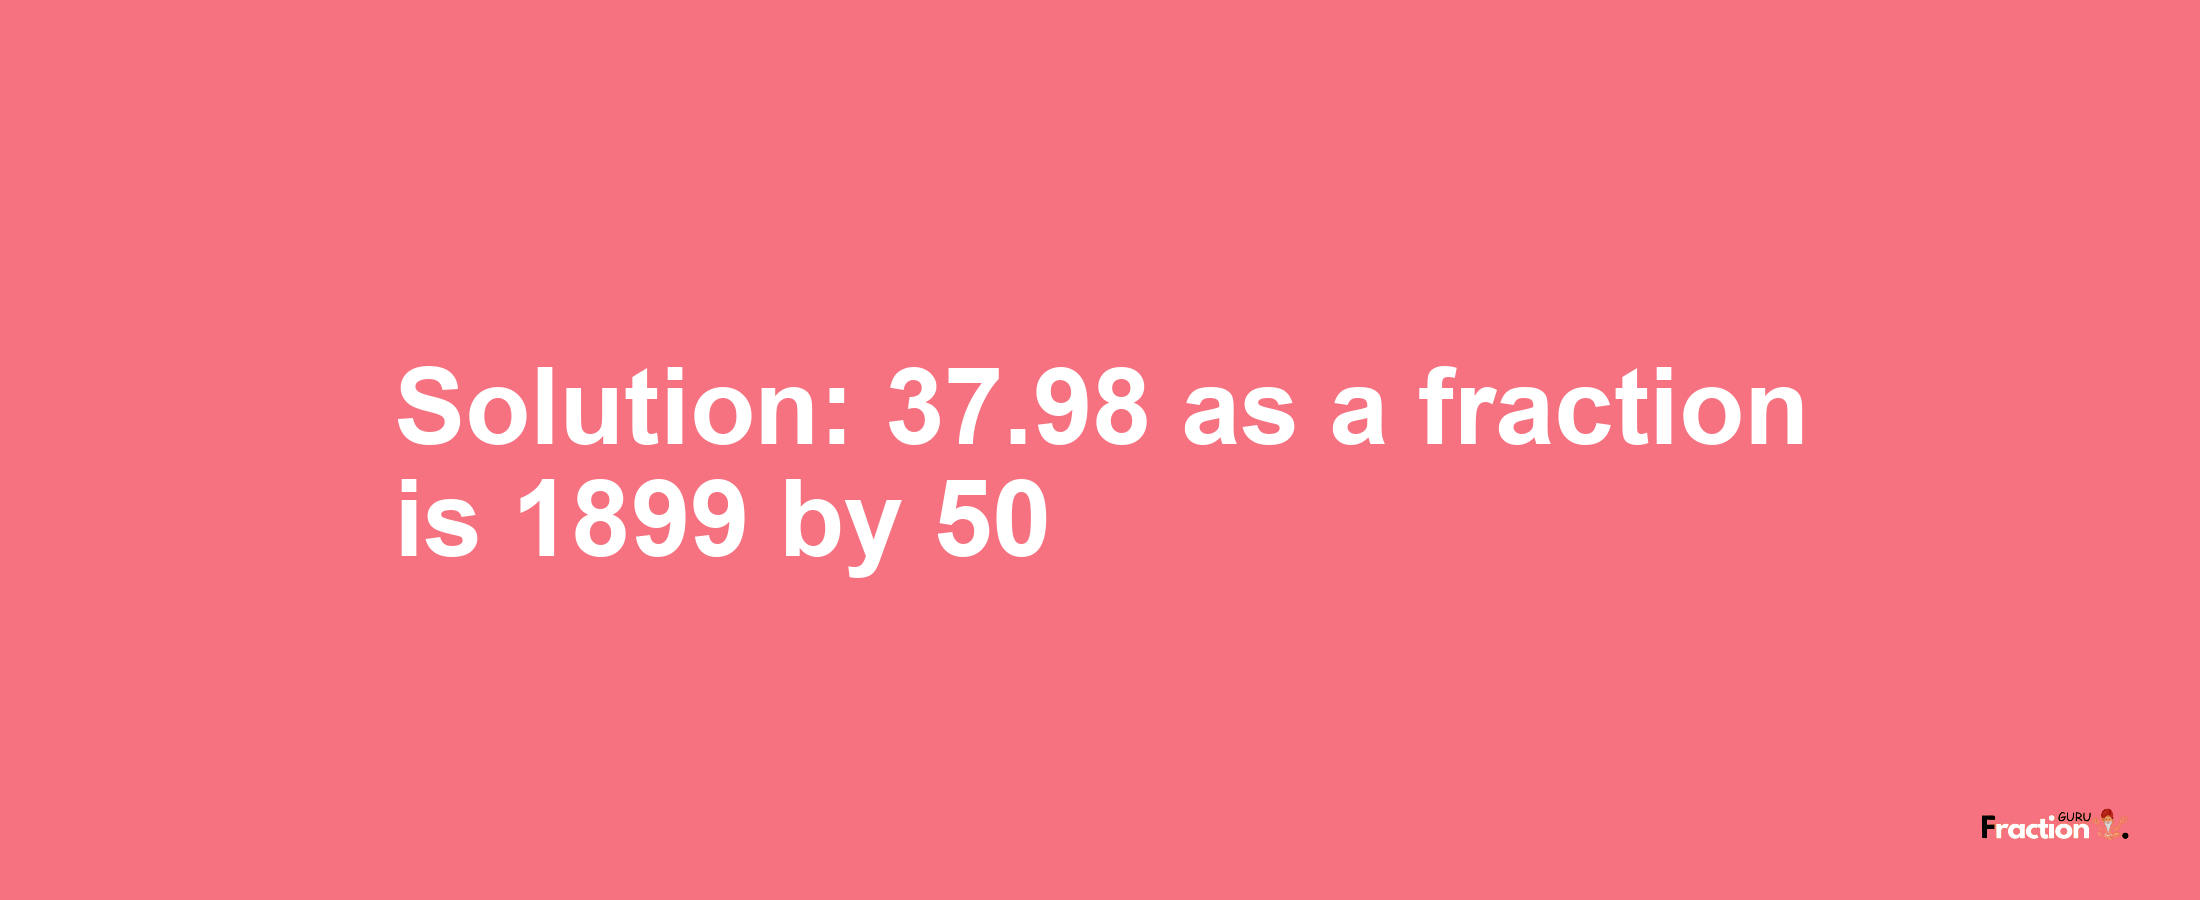 Solution:37.98 as a fraction is 1899/50